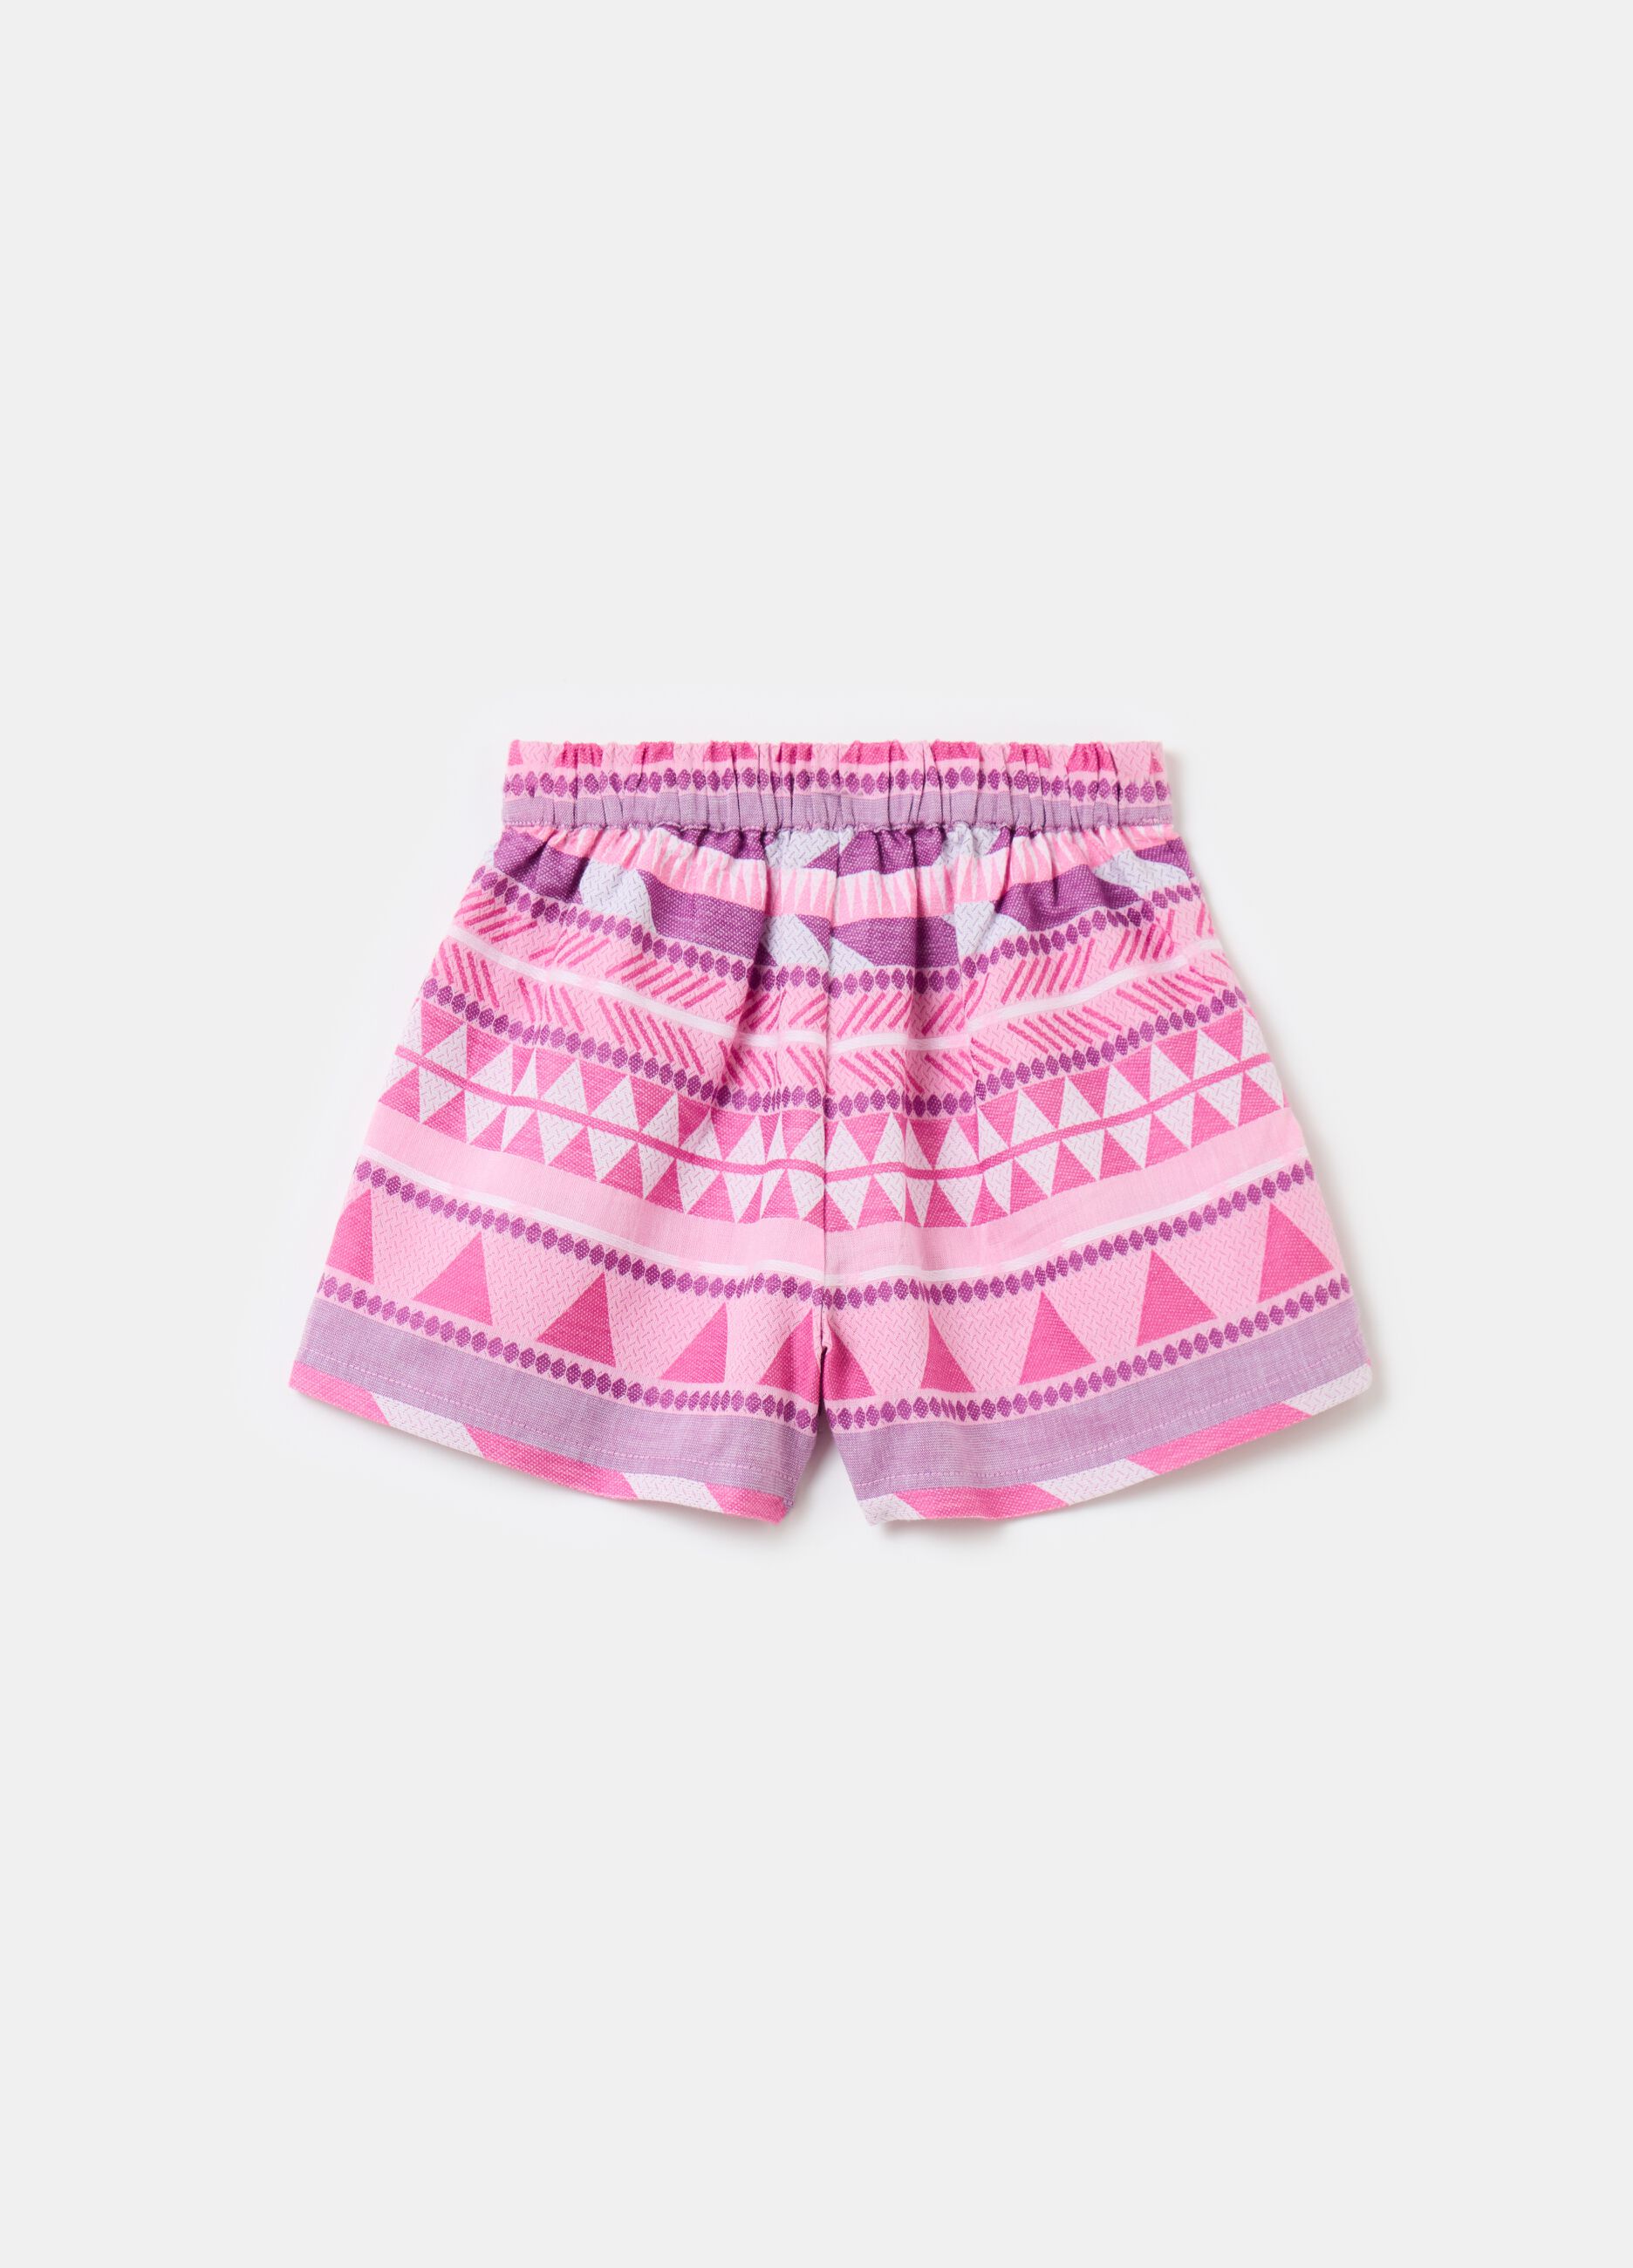 Shorts with ethnic jacquard designs